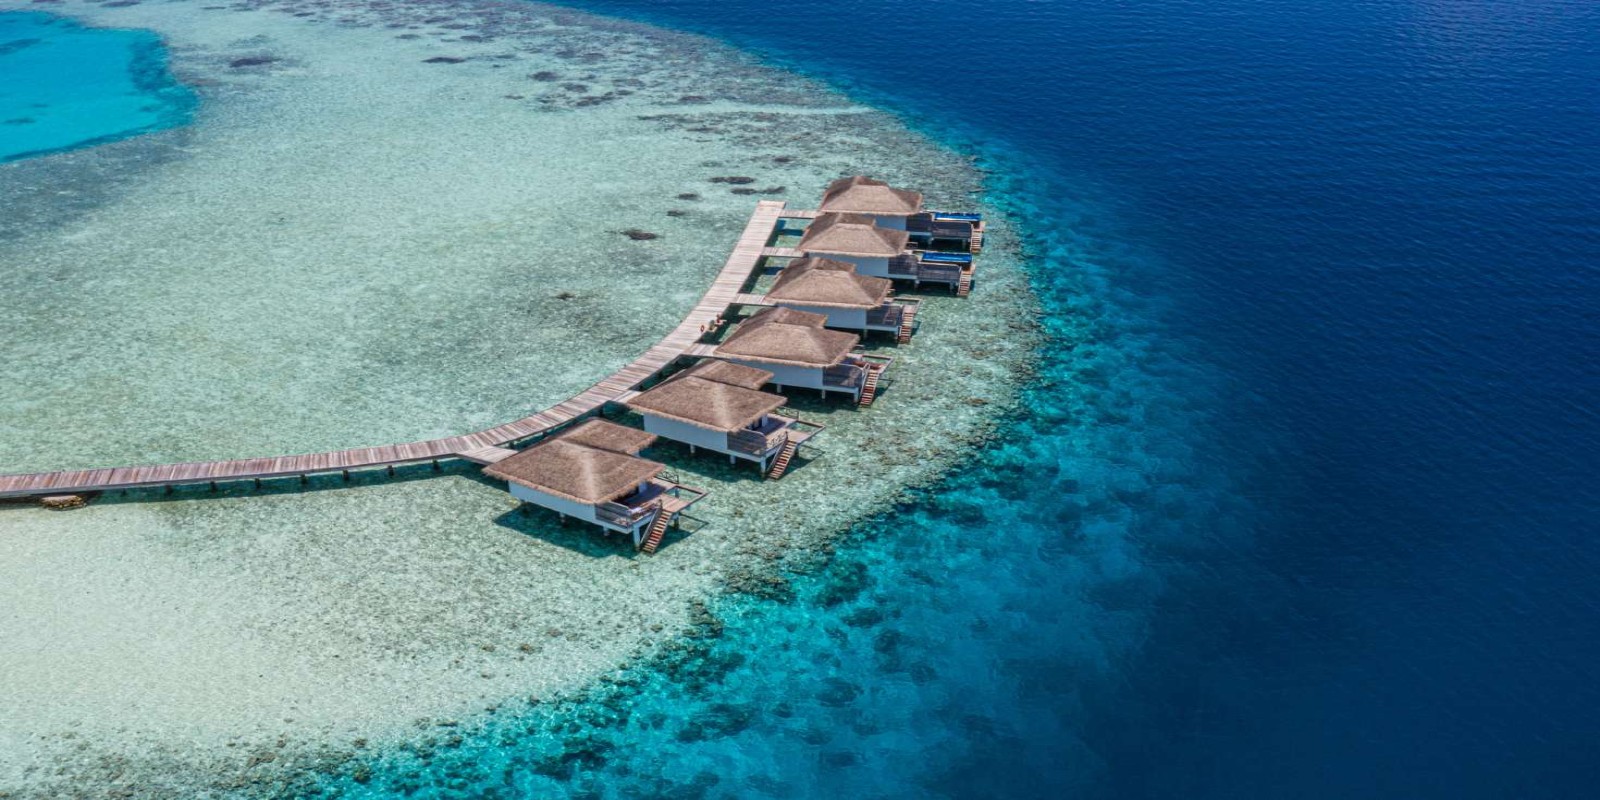 water villas over the indian ocean in the maldives